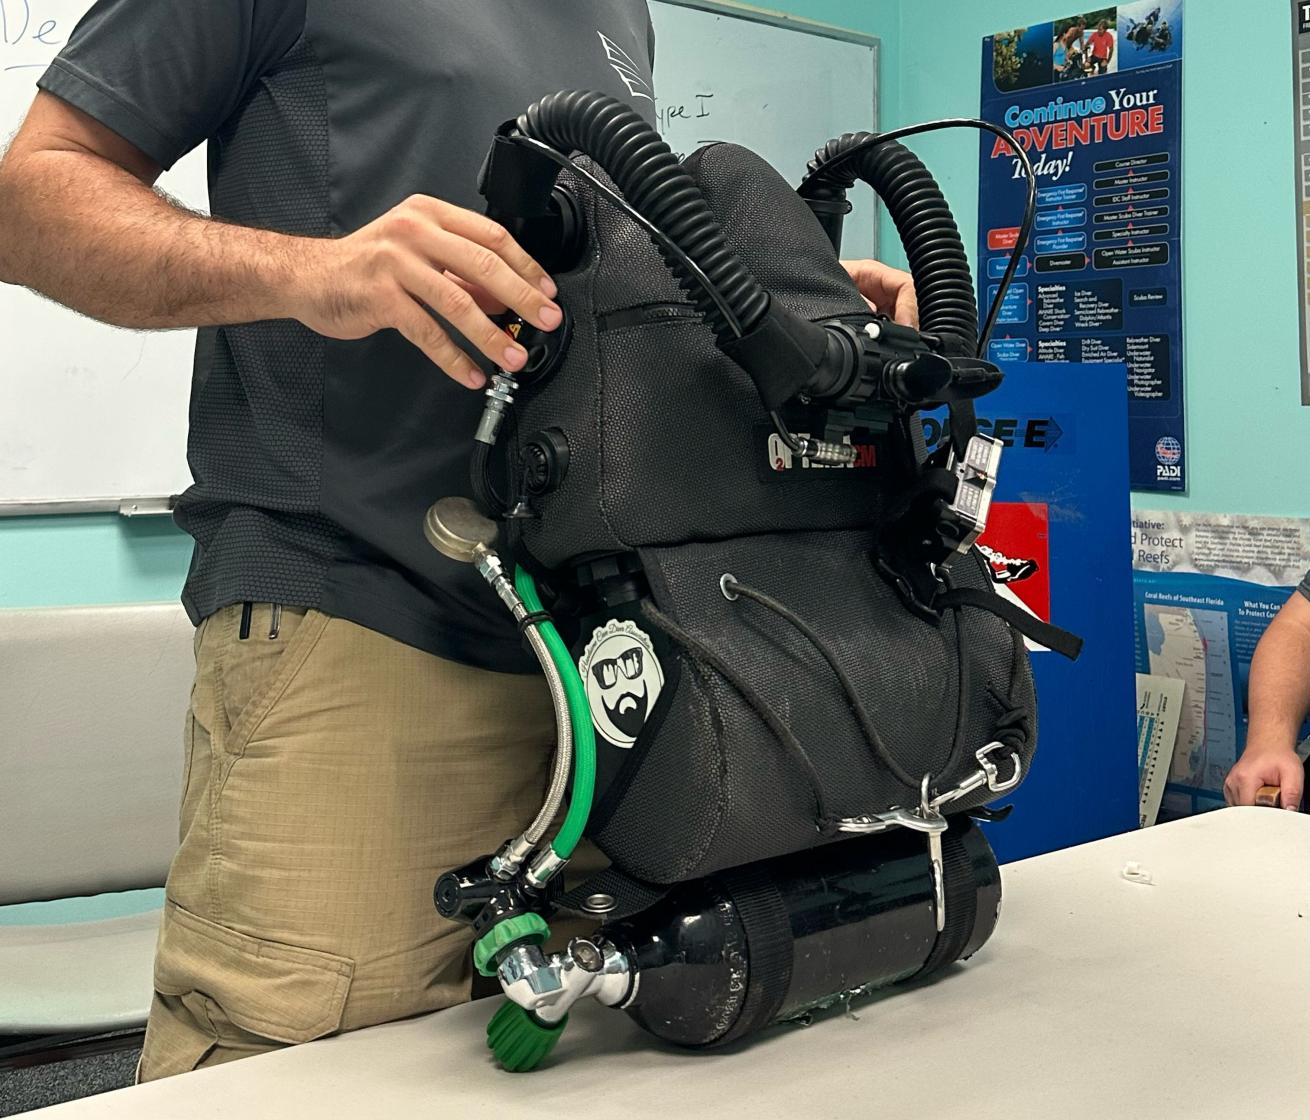 An image of the Dive Rite Chest Mount O2ptima closed circuit rebreather during a classroom training session.